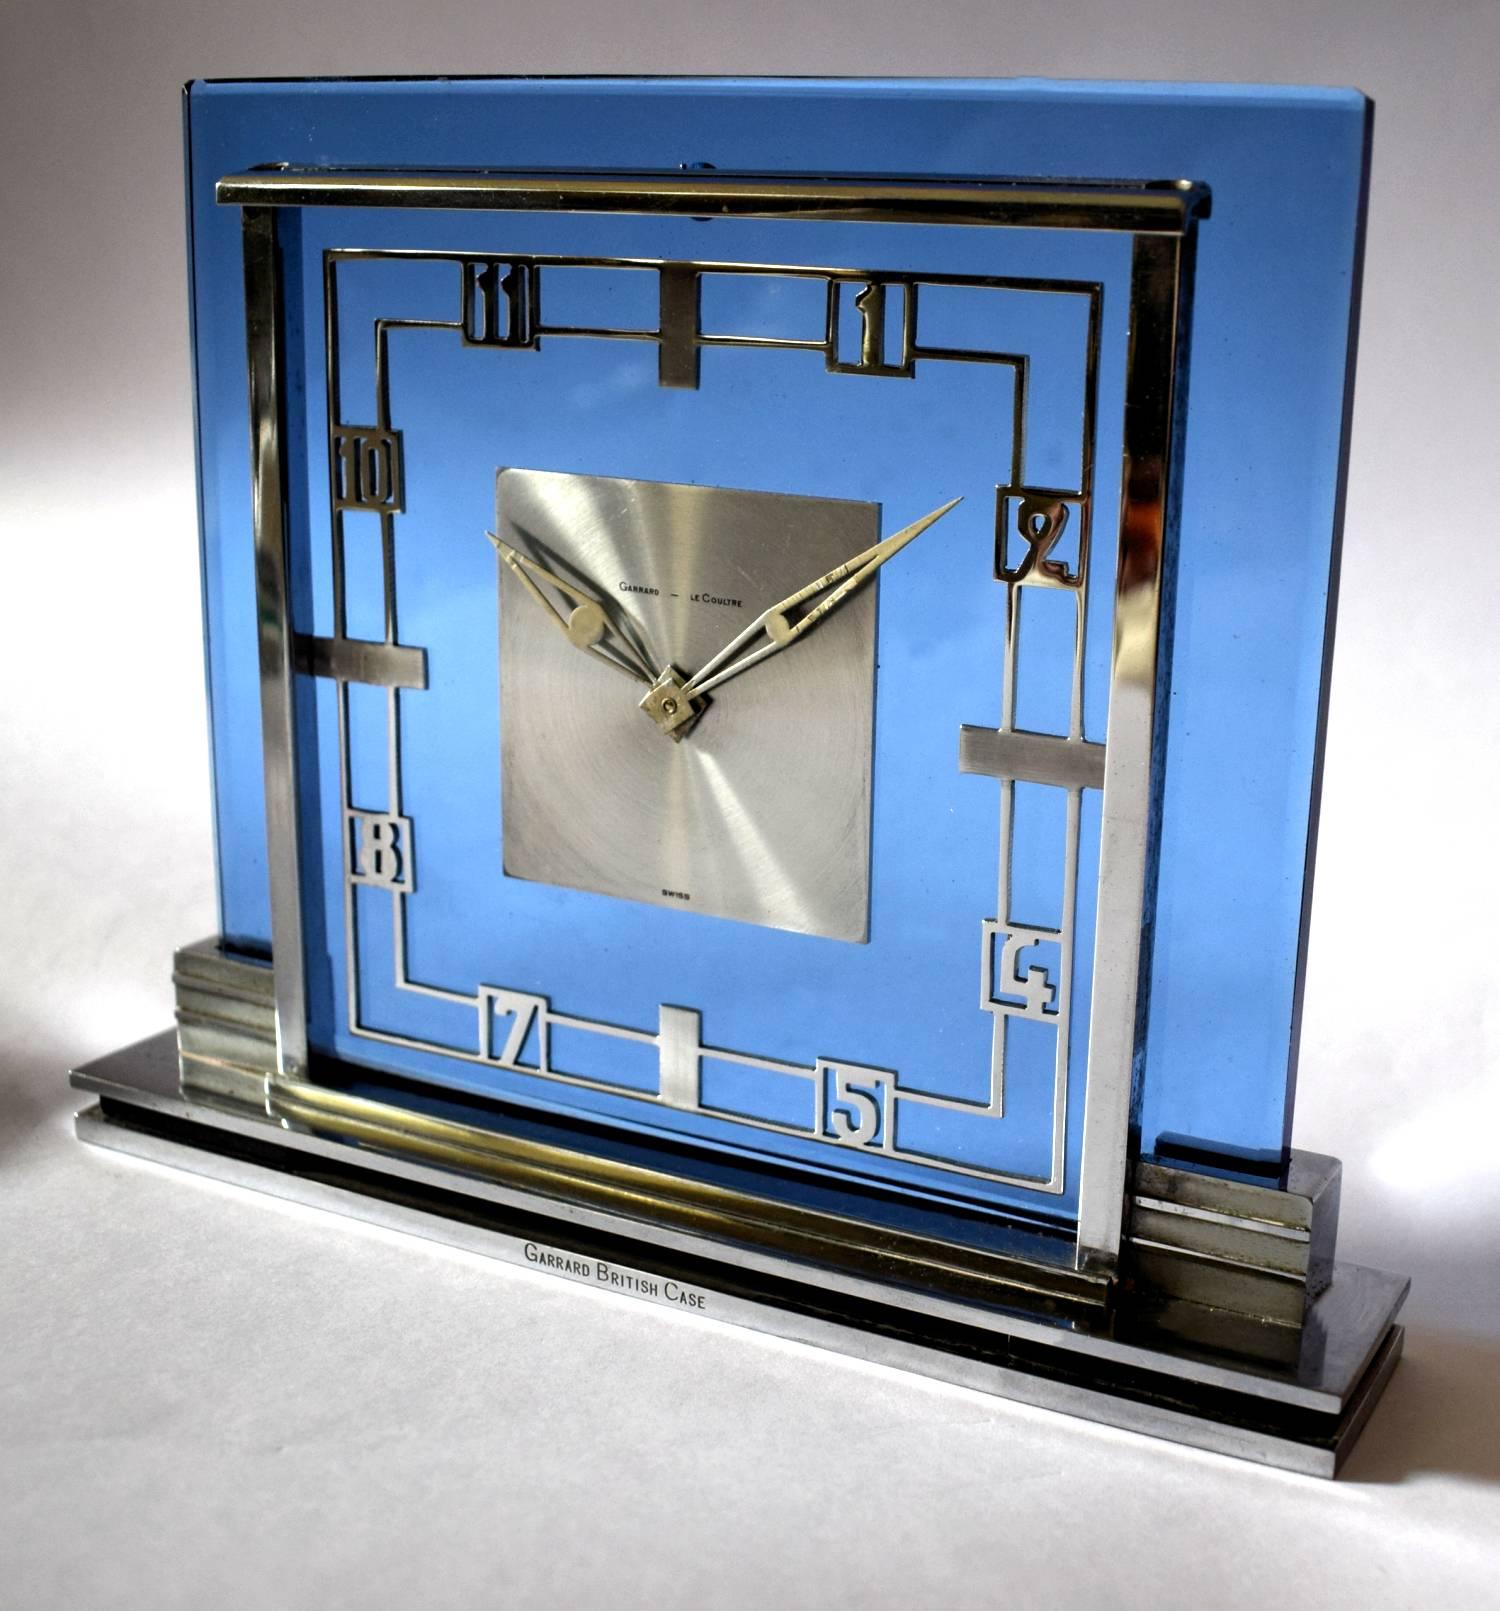 Aside the appearance and super rarity of this marvellous Art Deco clock on first viewing, one can't be distracted away from the condition as well, which for its 90 odd years is nothing less than amazing. This really is an eyebrow raising clock in